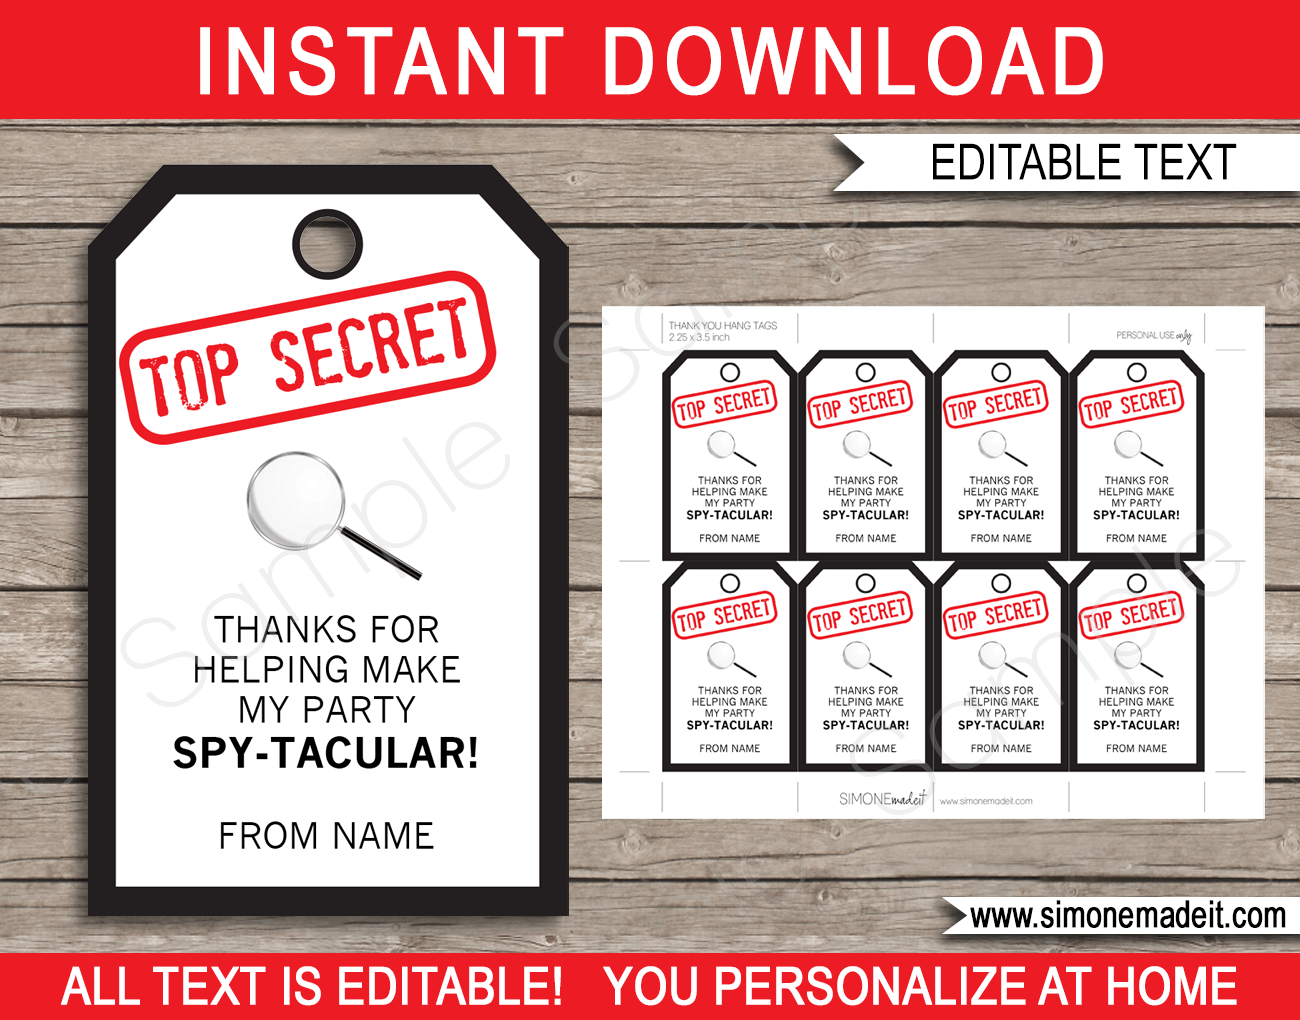 Printable Spy Party Favor Tags Template | Thank You Tags | Secret Agent Birthday Party | DIY Editable Text | INSTANT DOWNLOAD $3.00 via SIMONEmadeit.com